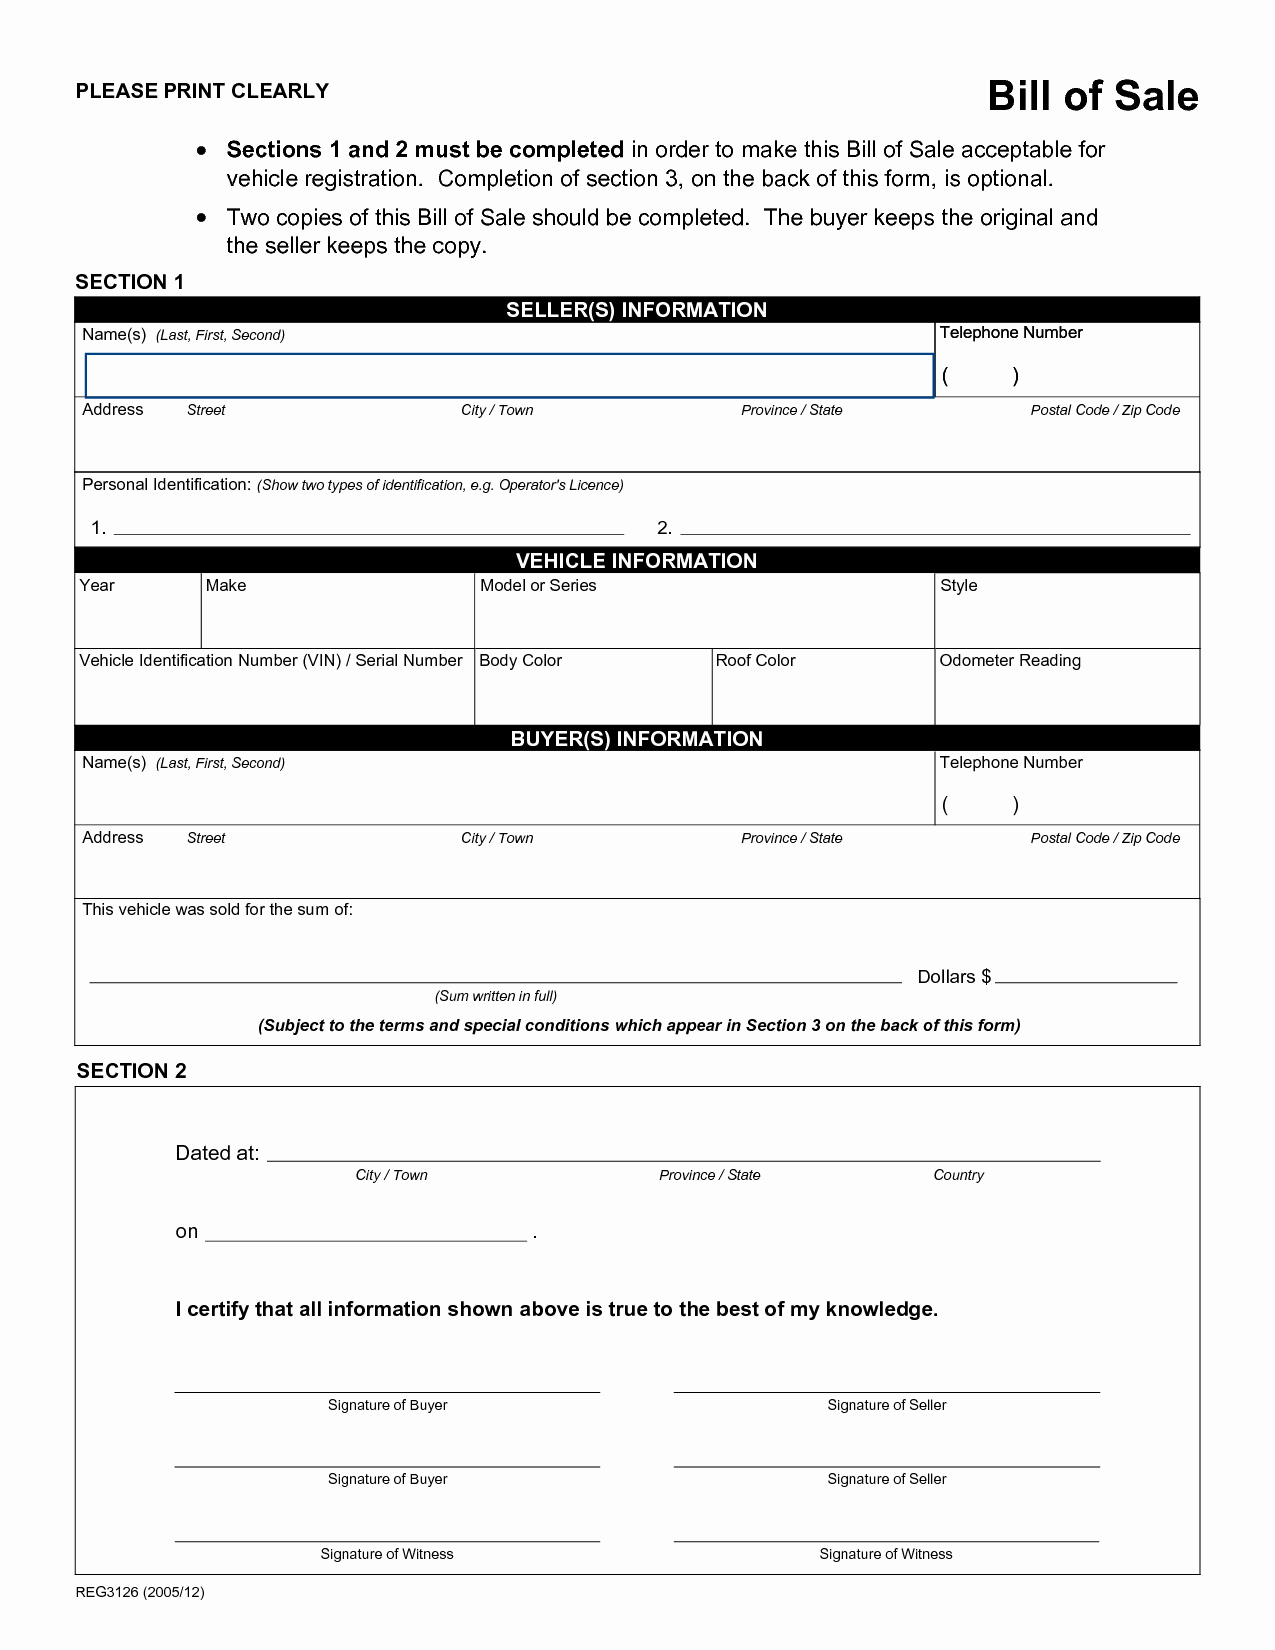 Bill Of Sale Used Vehicle Lovely Free Printable Auto Bill Of Sale form Generic